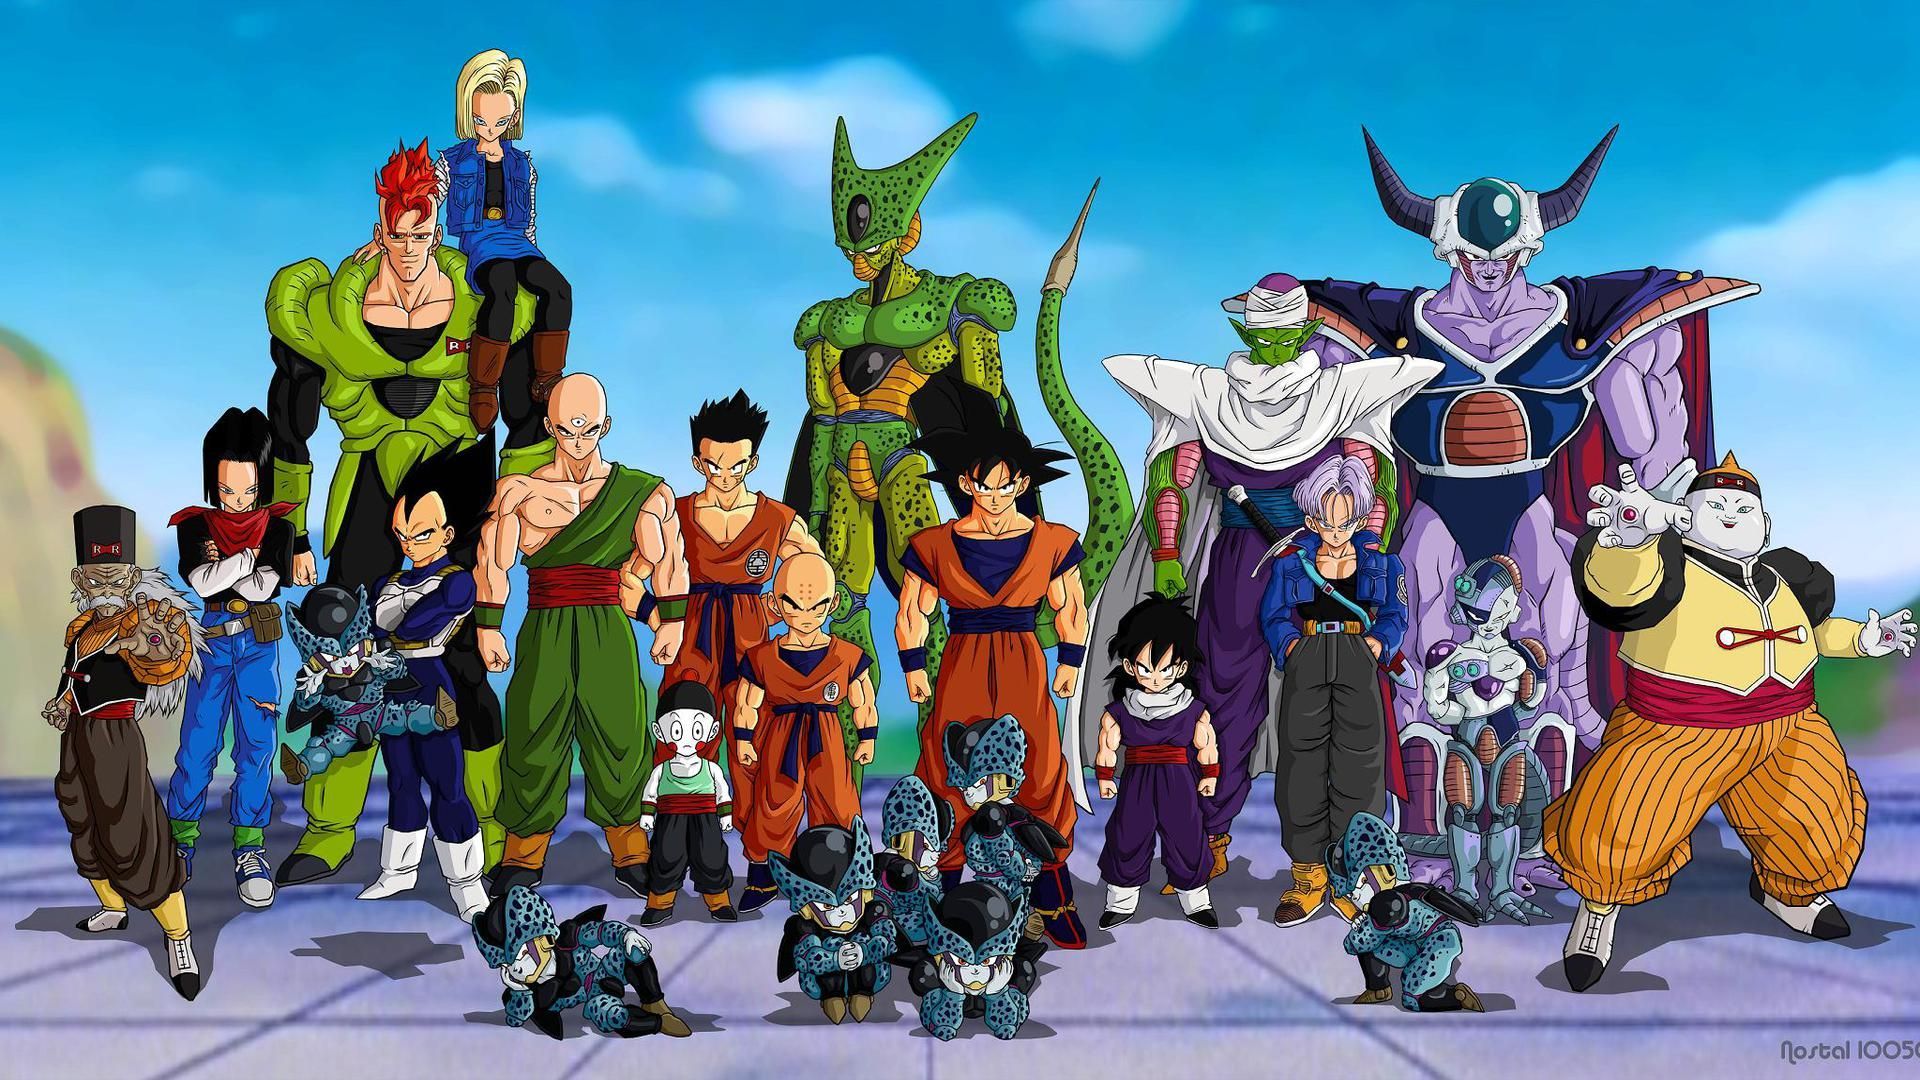 Dragon Ball Z All Characters Image Picture Anime HD Wallpaper Widescreen for Desktop PC. Anime dragon ball, Dragon ball, Dragon ball z